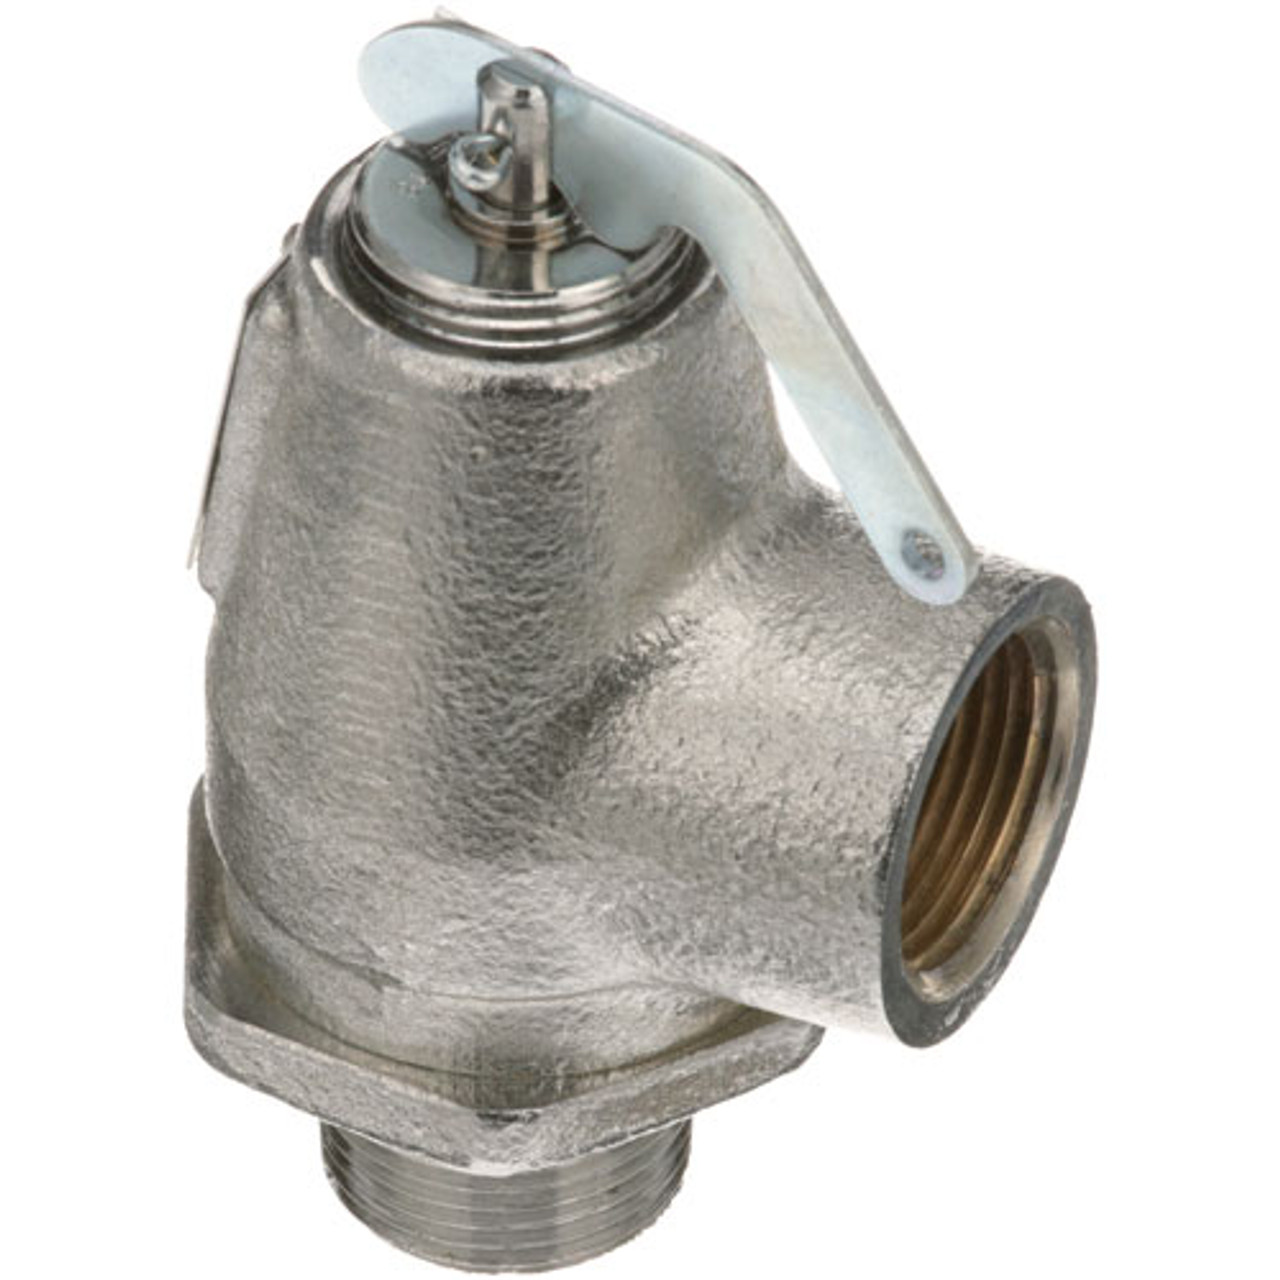 Safety Valve 3/4"M X 3/4"F - Replacement Part For Legion 404228